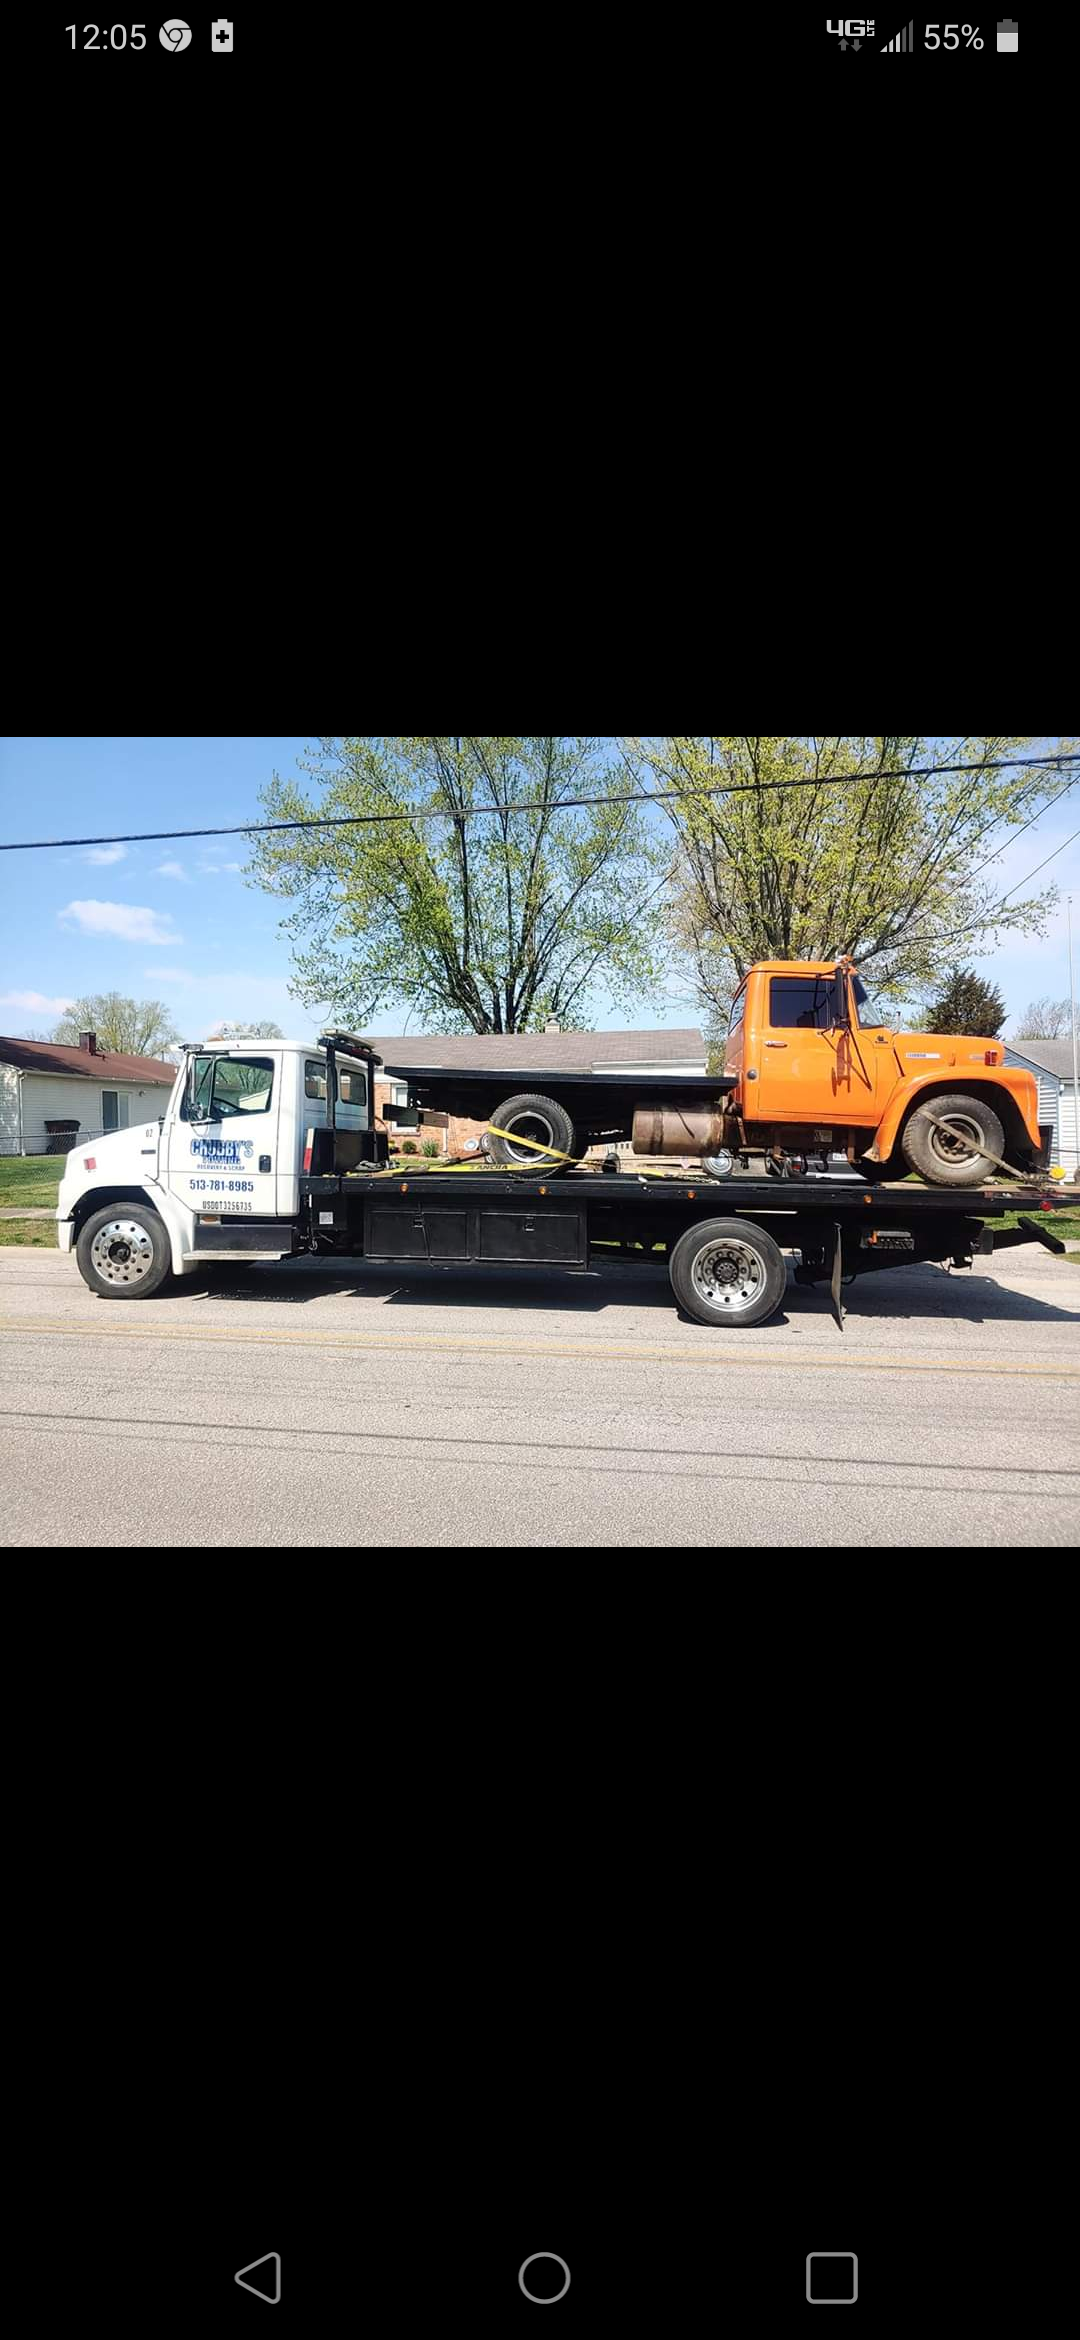 Chubbys towing recovery and scrap